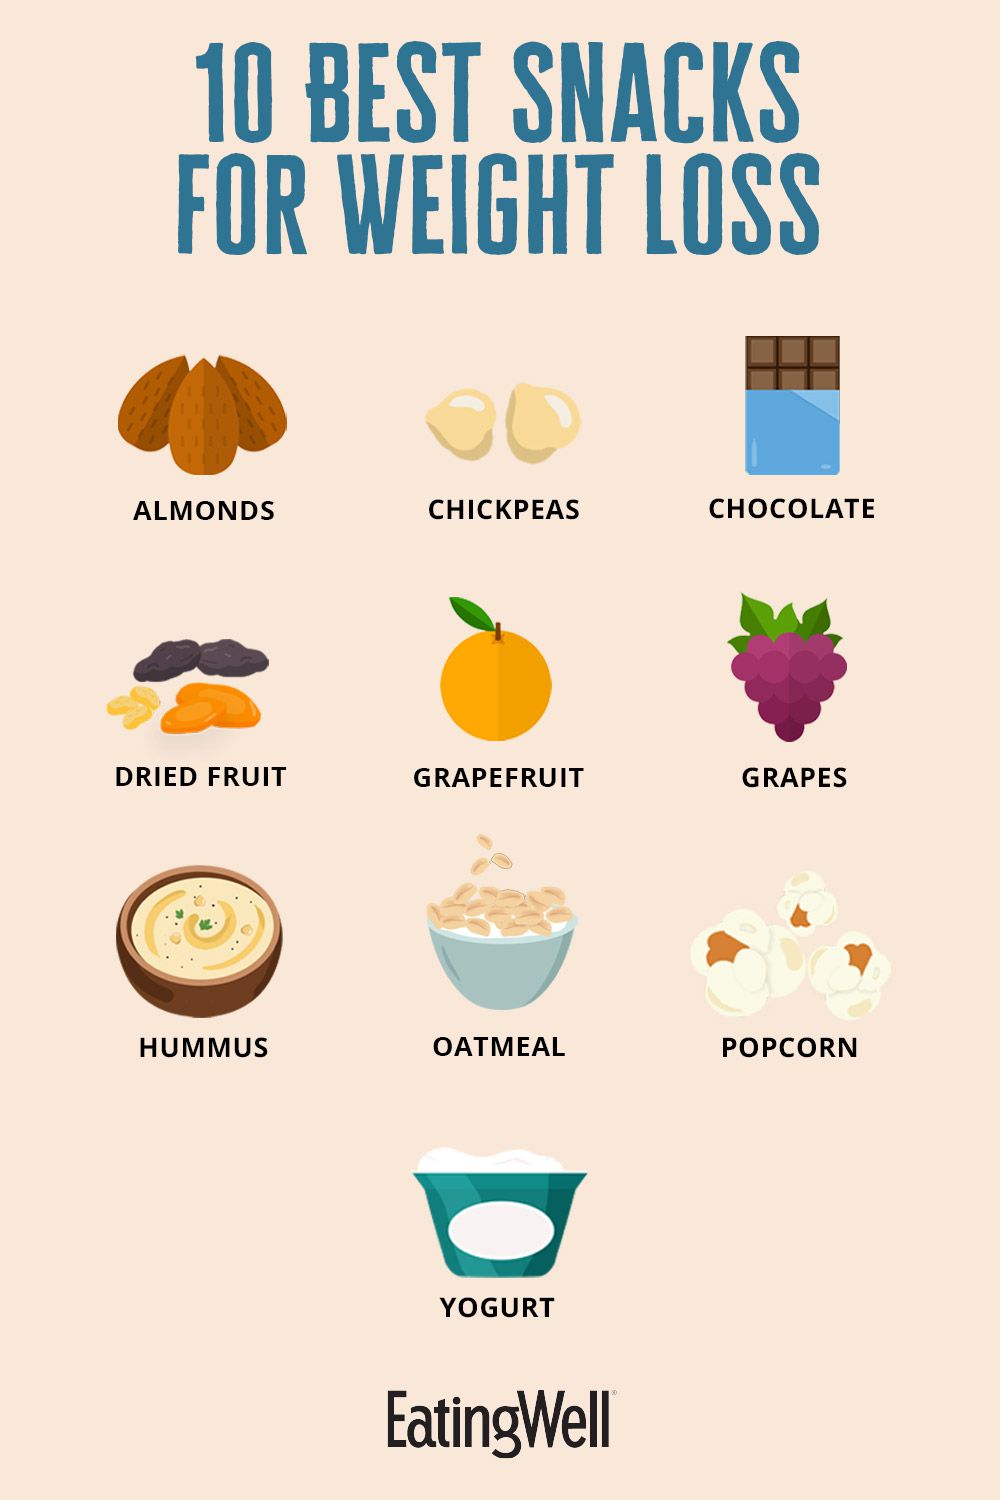 What are some healthy snacking choices?